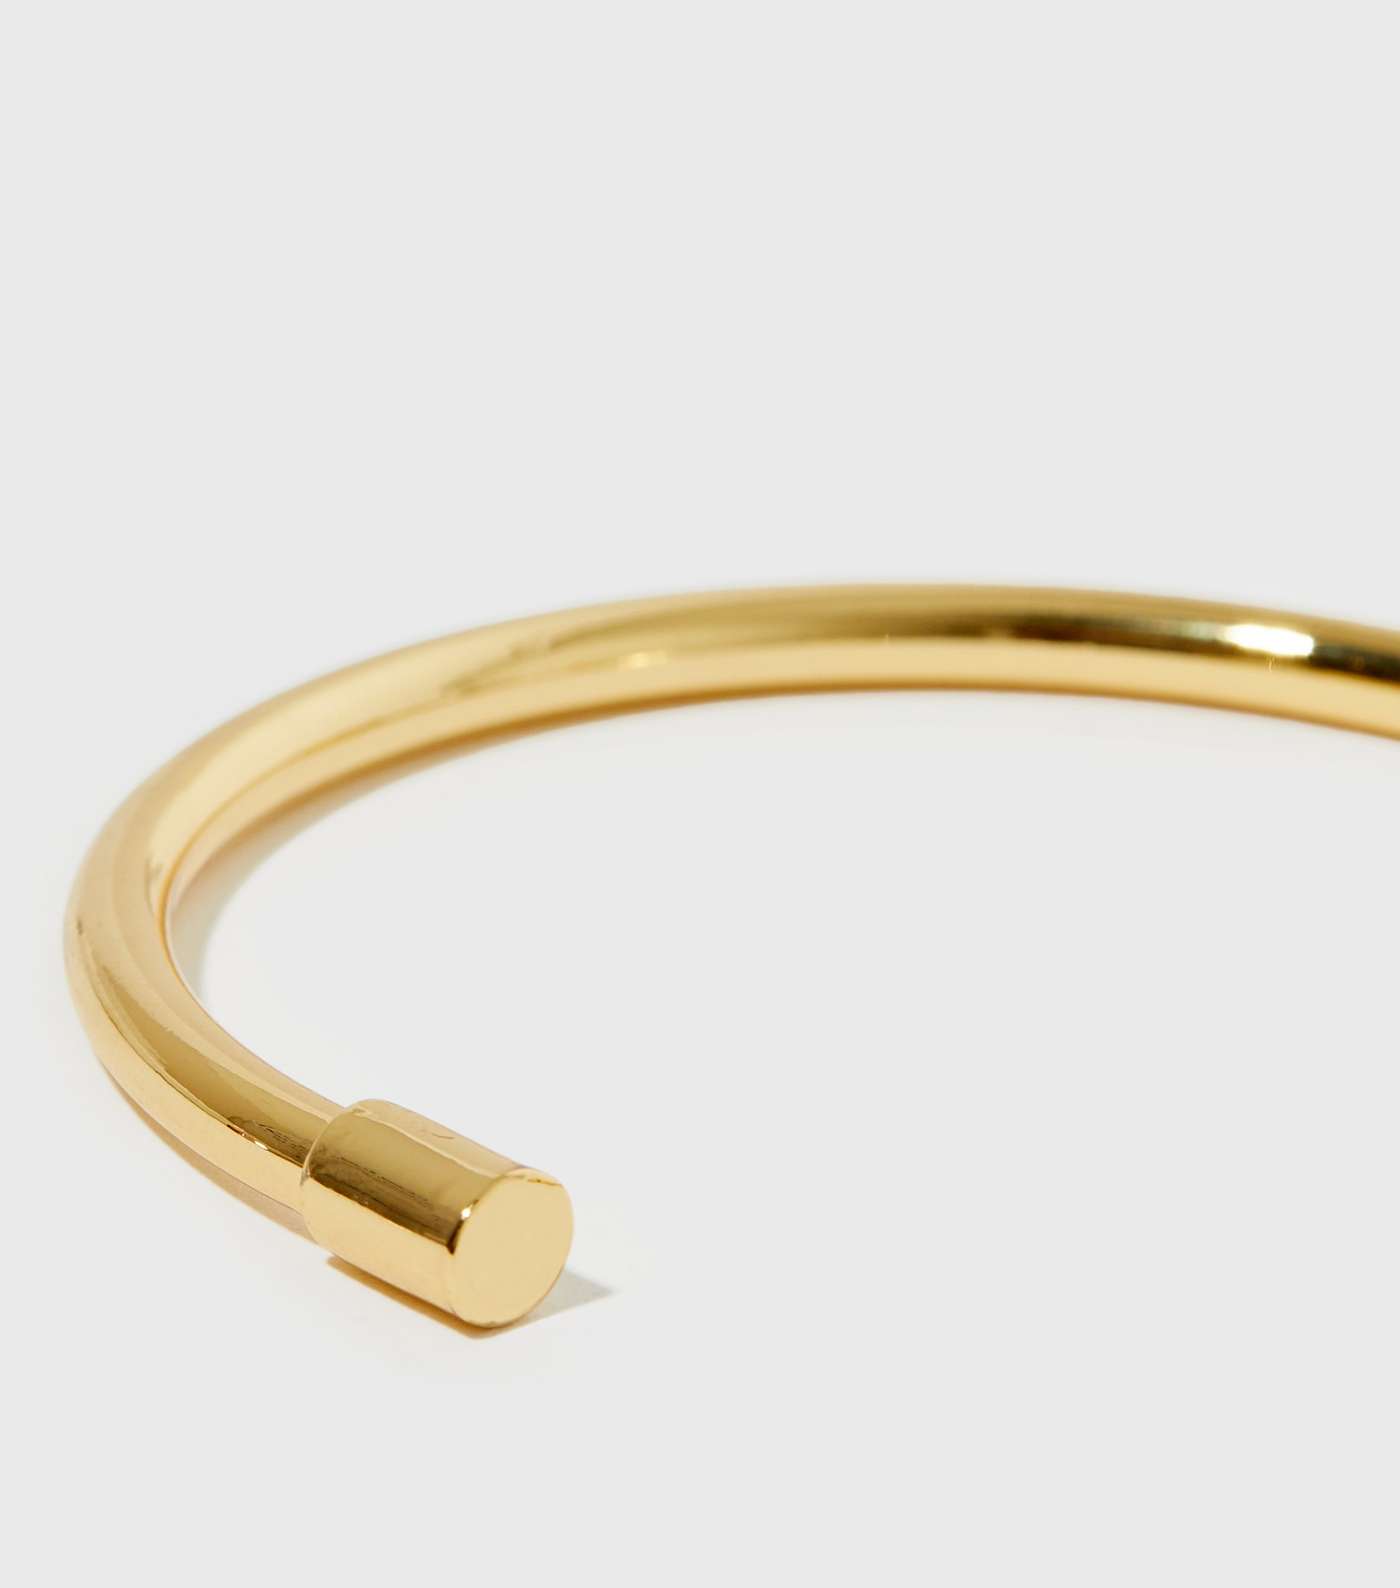 Real Gold Plate Cuff Bracelet Image 4